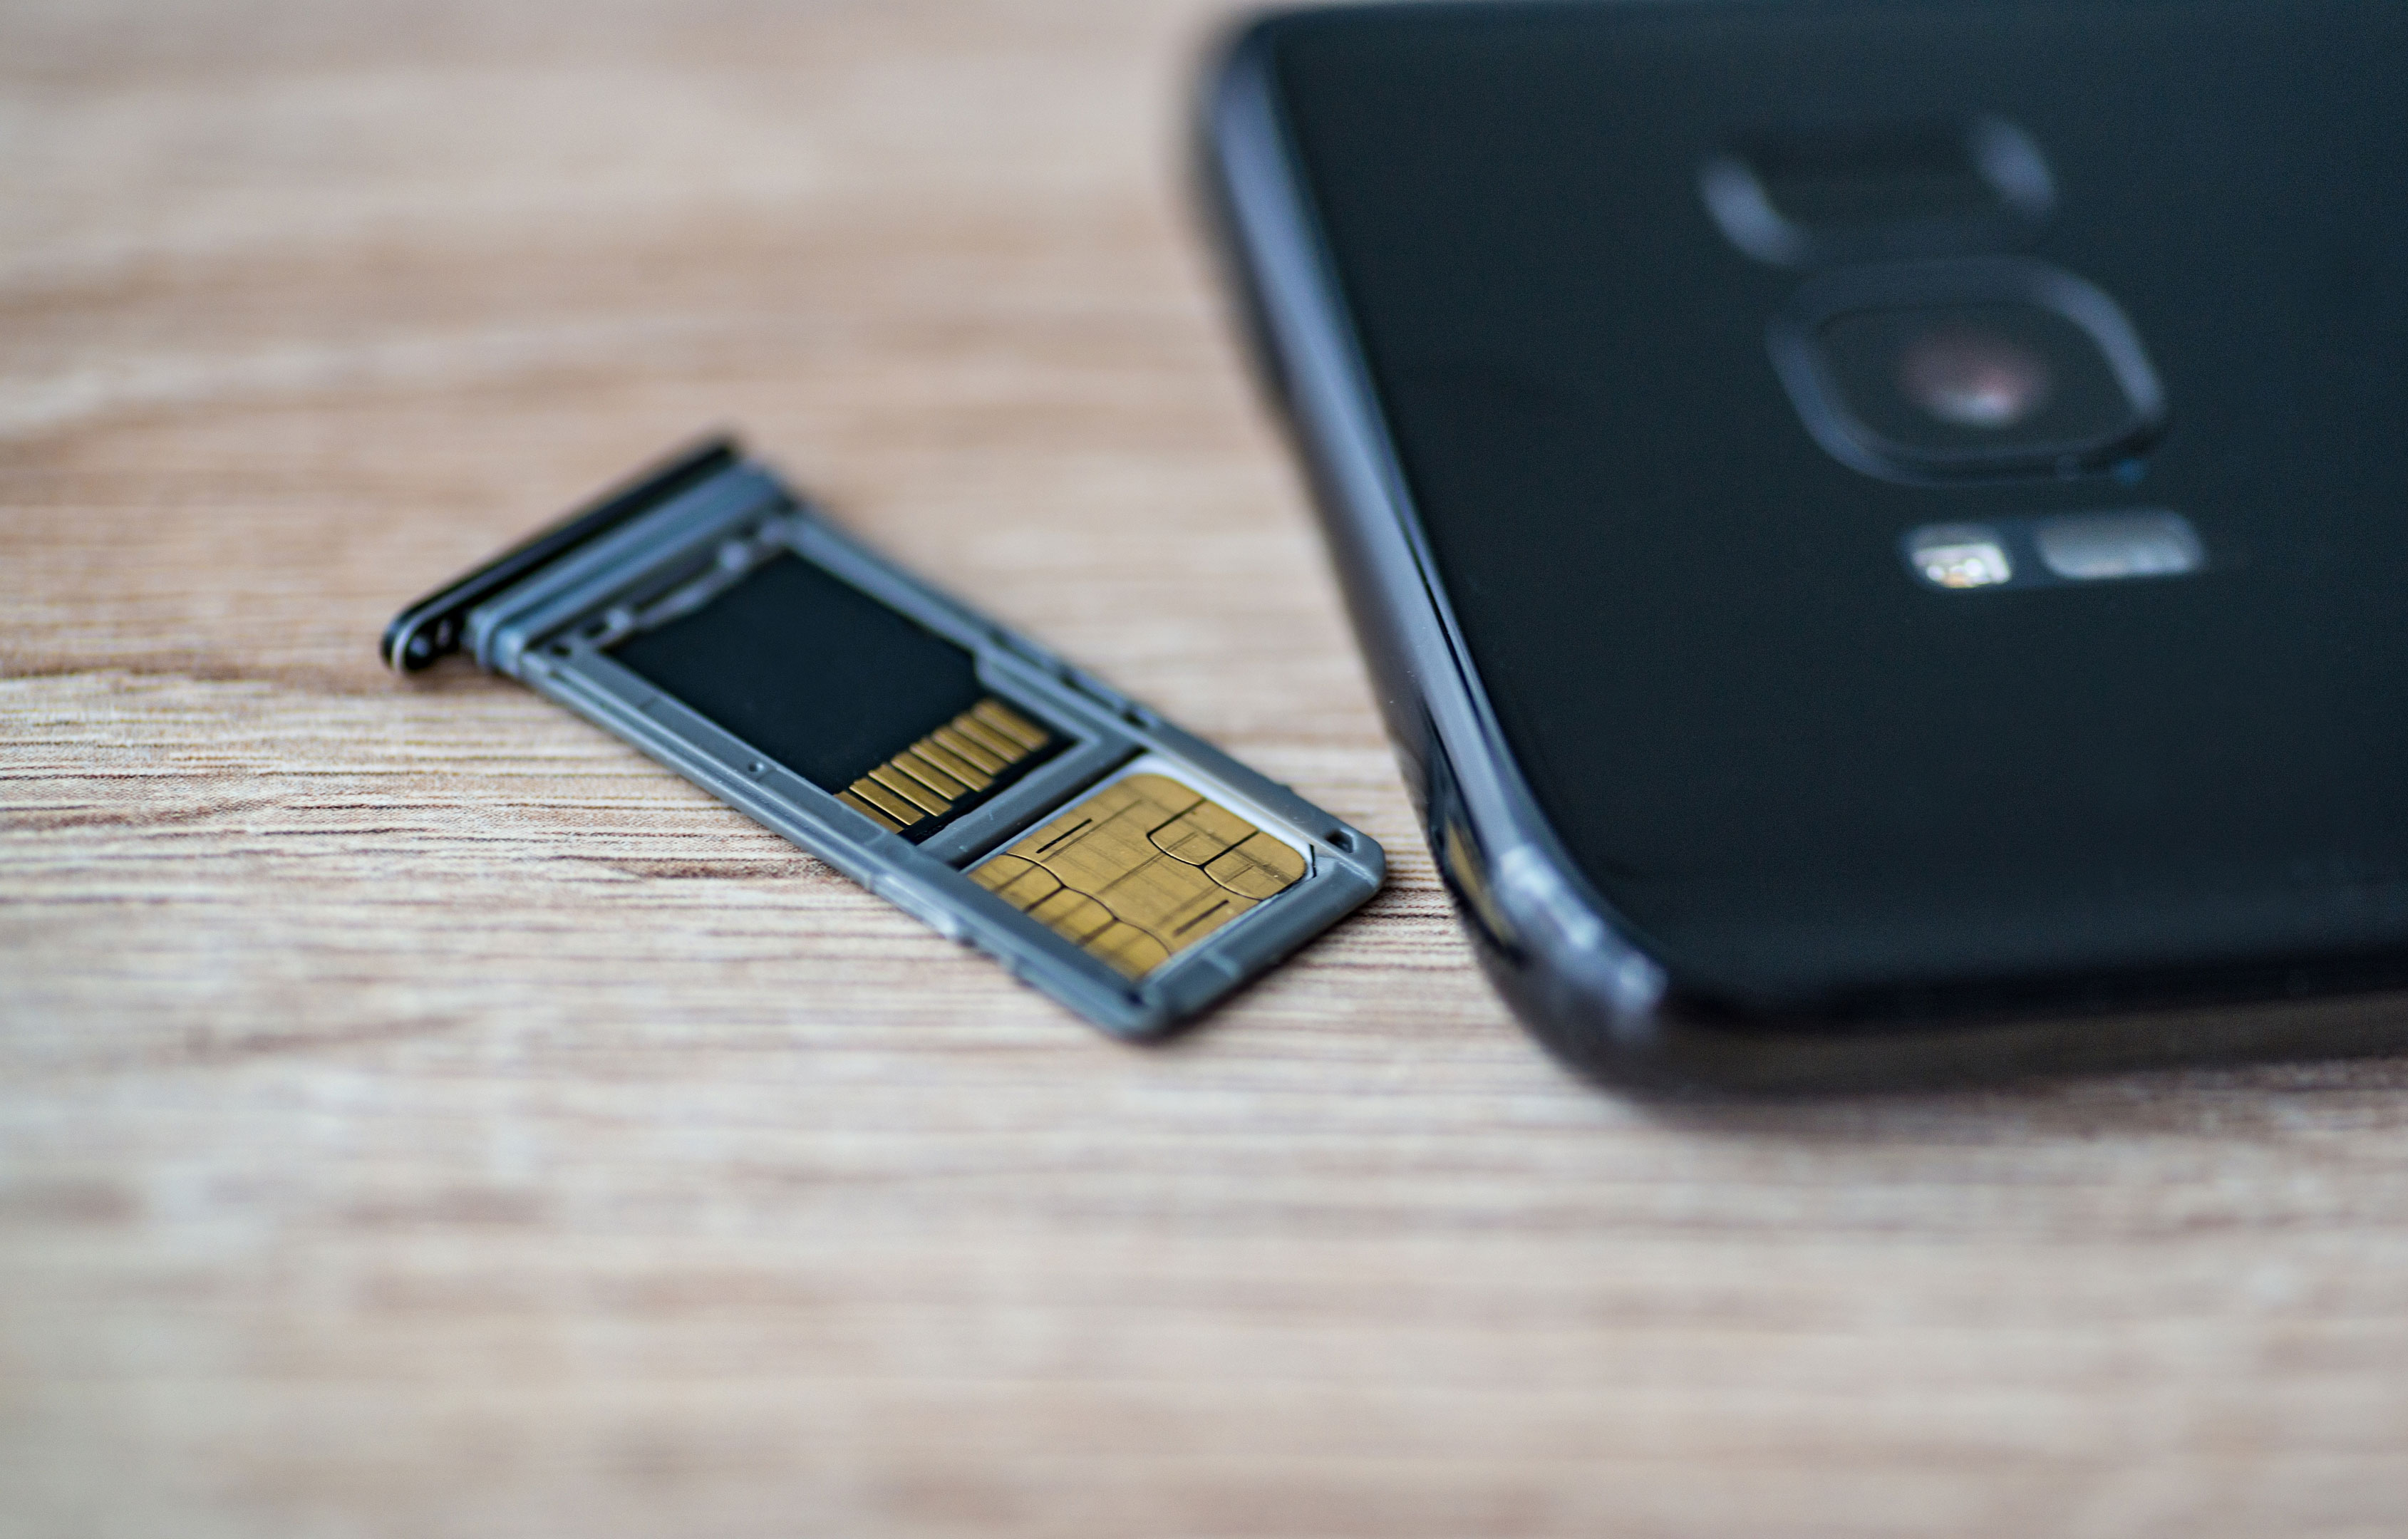 How to save photos to SD card on your Android phone | NextPit